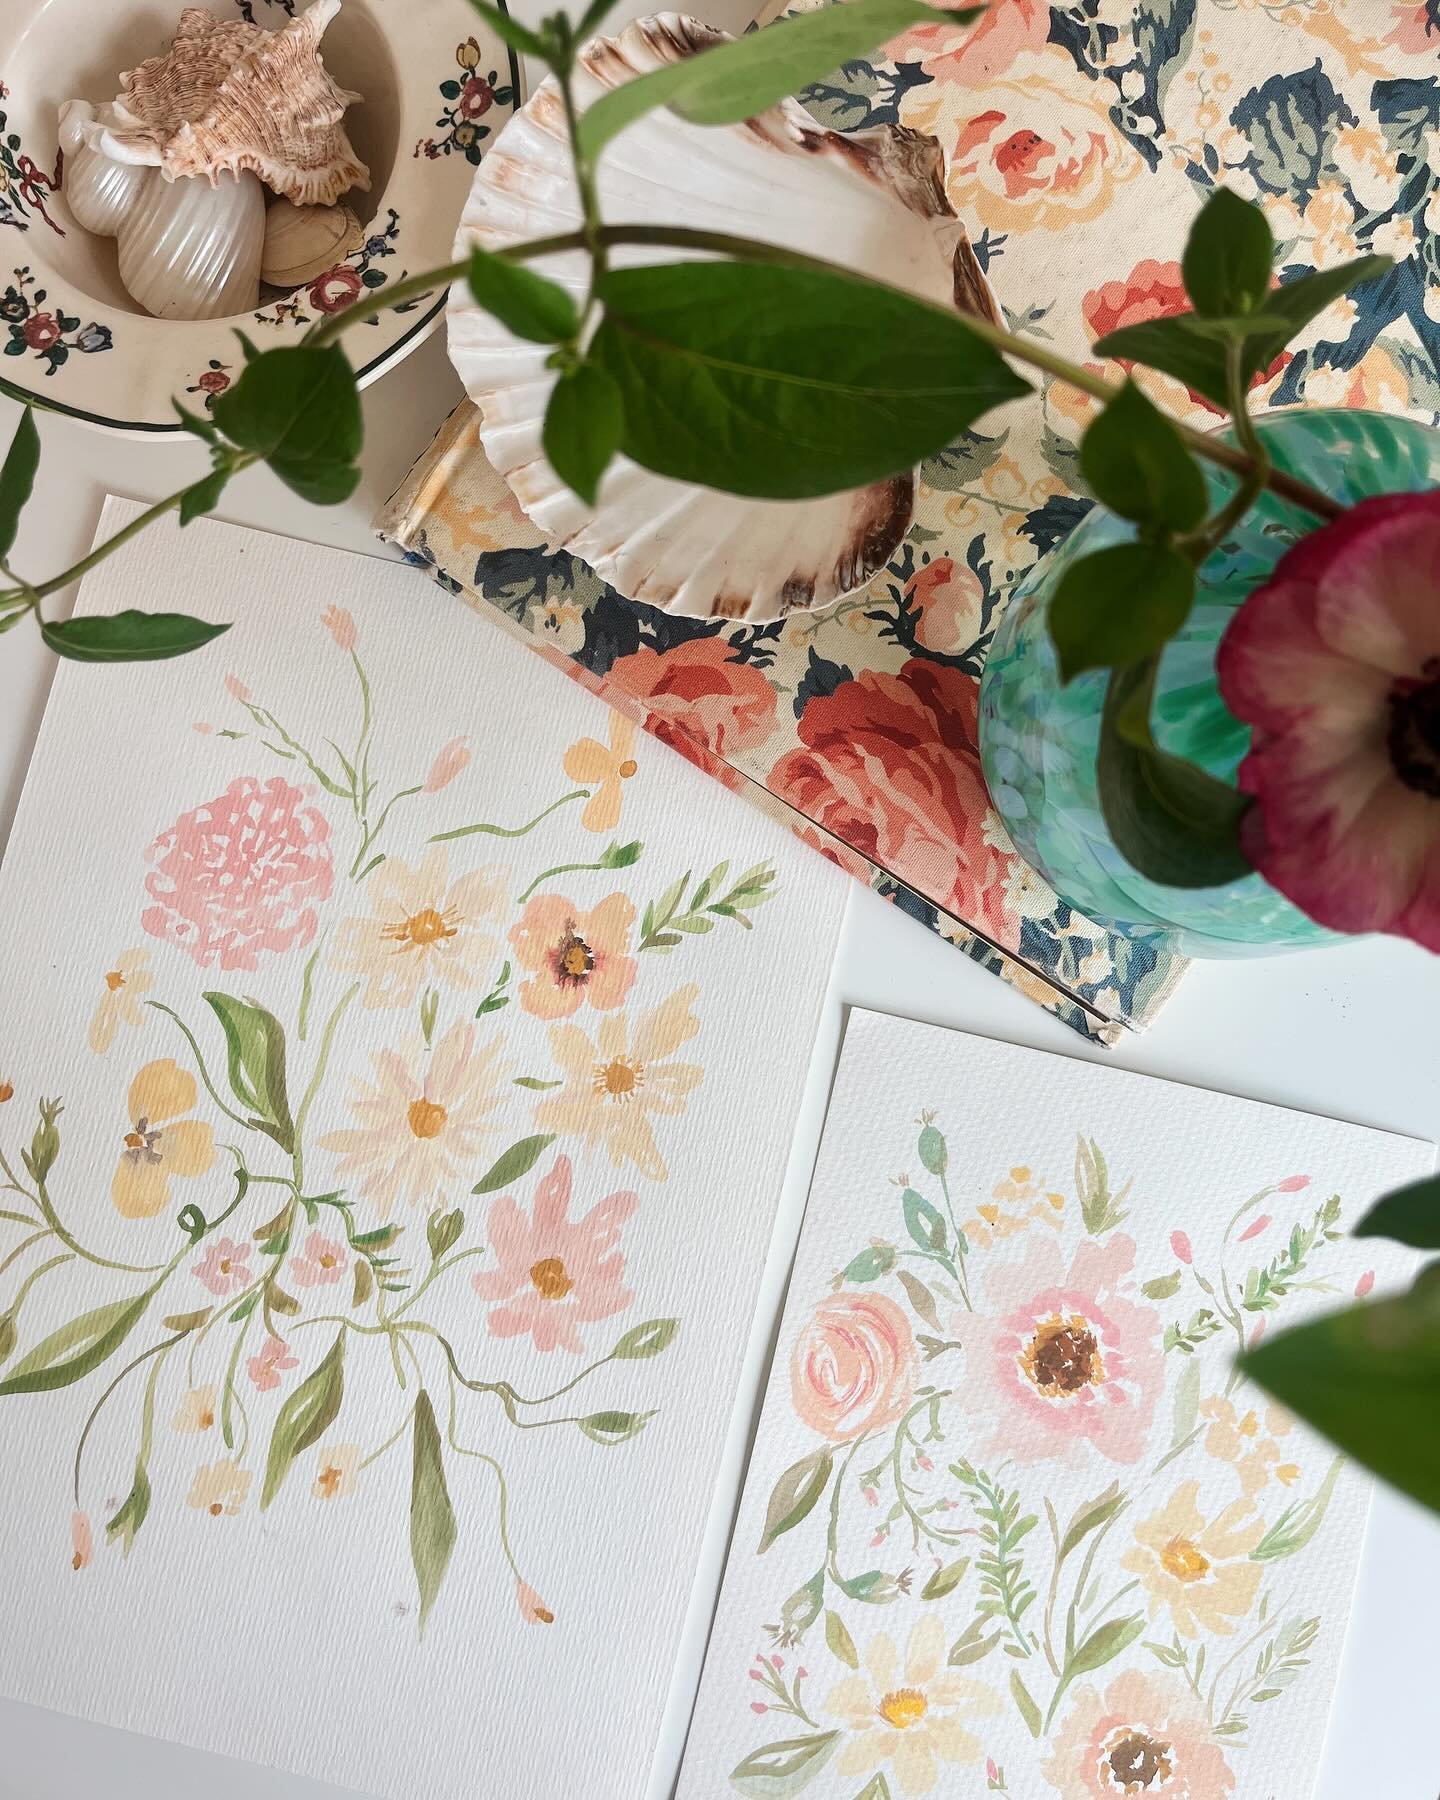 Join me for an online workshop in May, learning how to paint seasonal floral designs with gouache paint, I&rsquo;ll be working through colour mixing, creating textures, &amp; layering paints, working step by step to paint these two floral designs wit